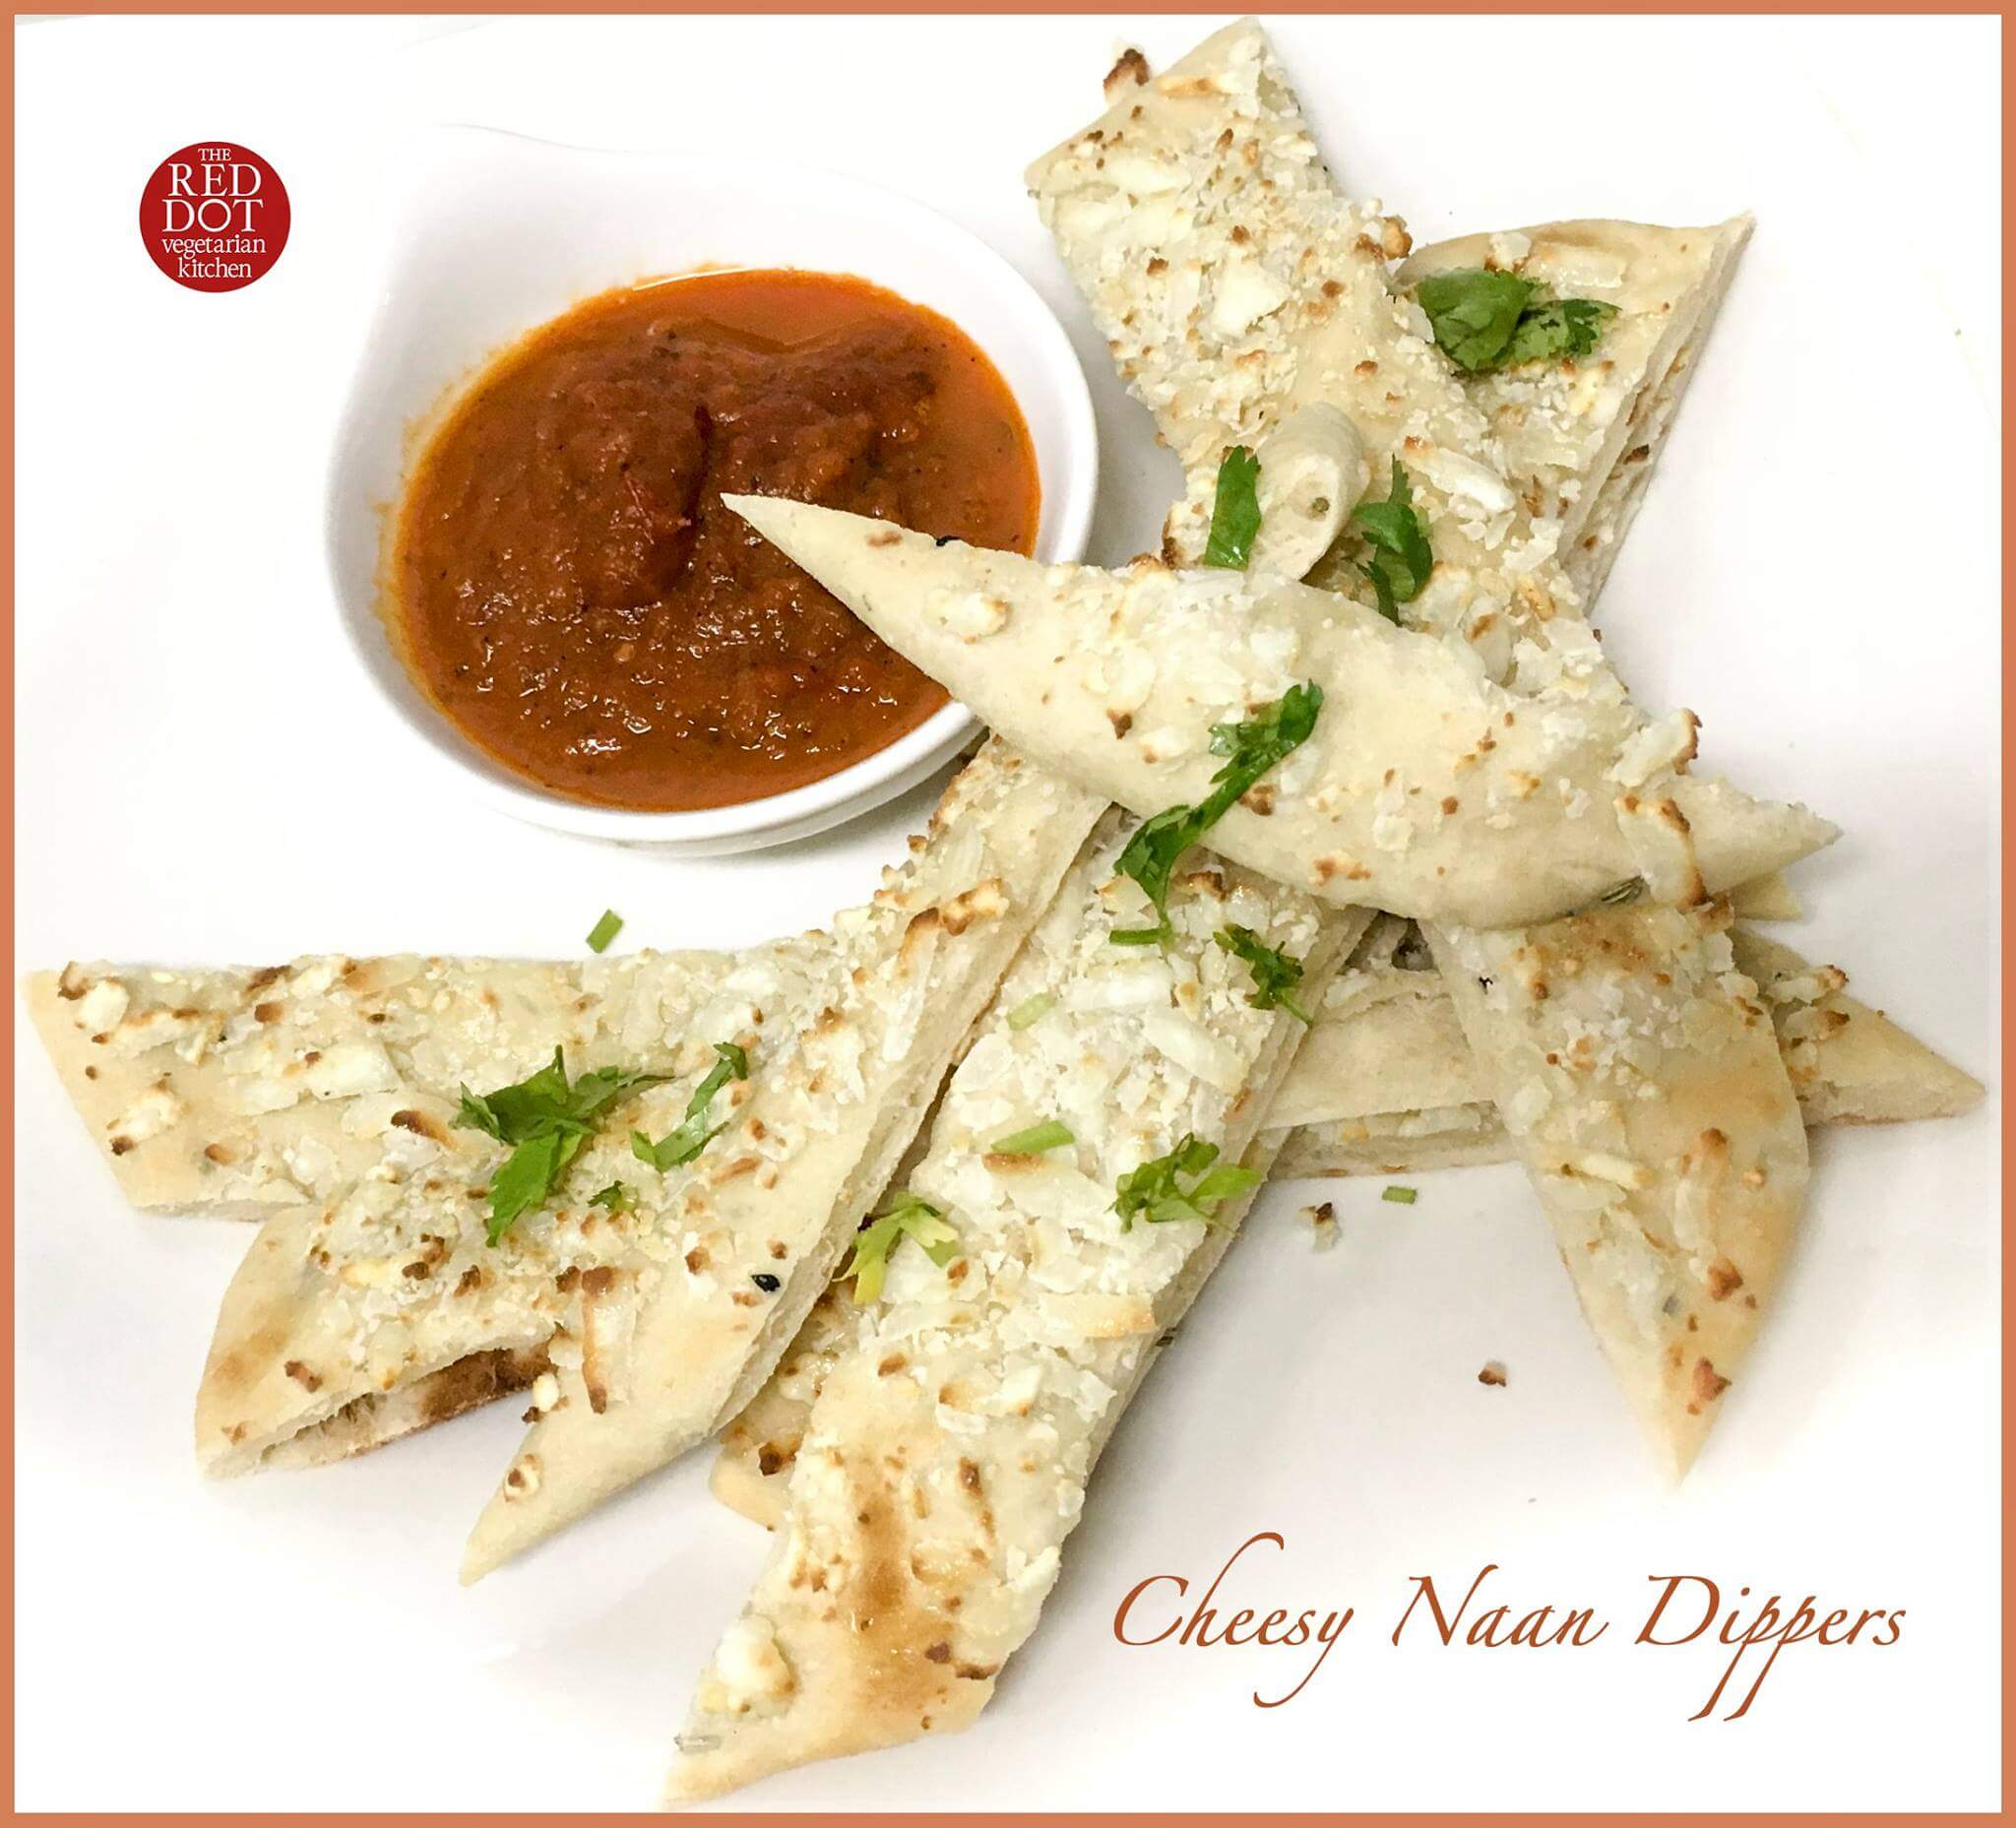 Cheesy Naan Dippers